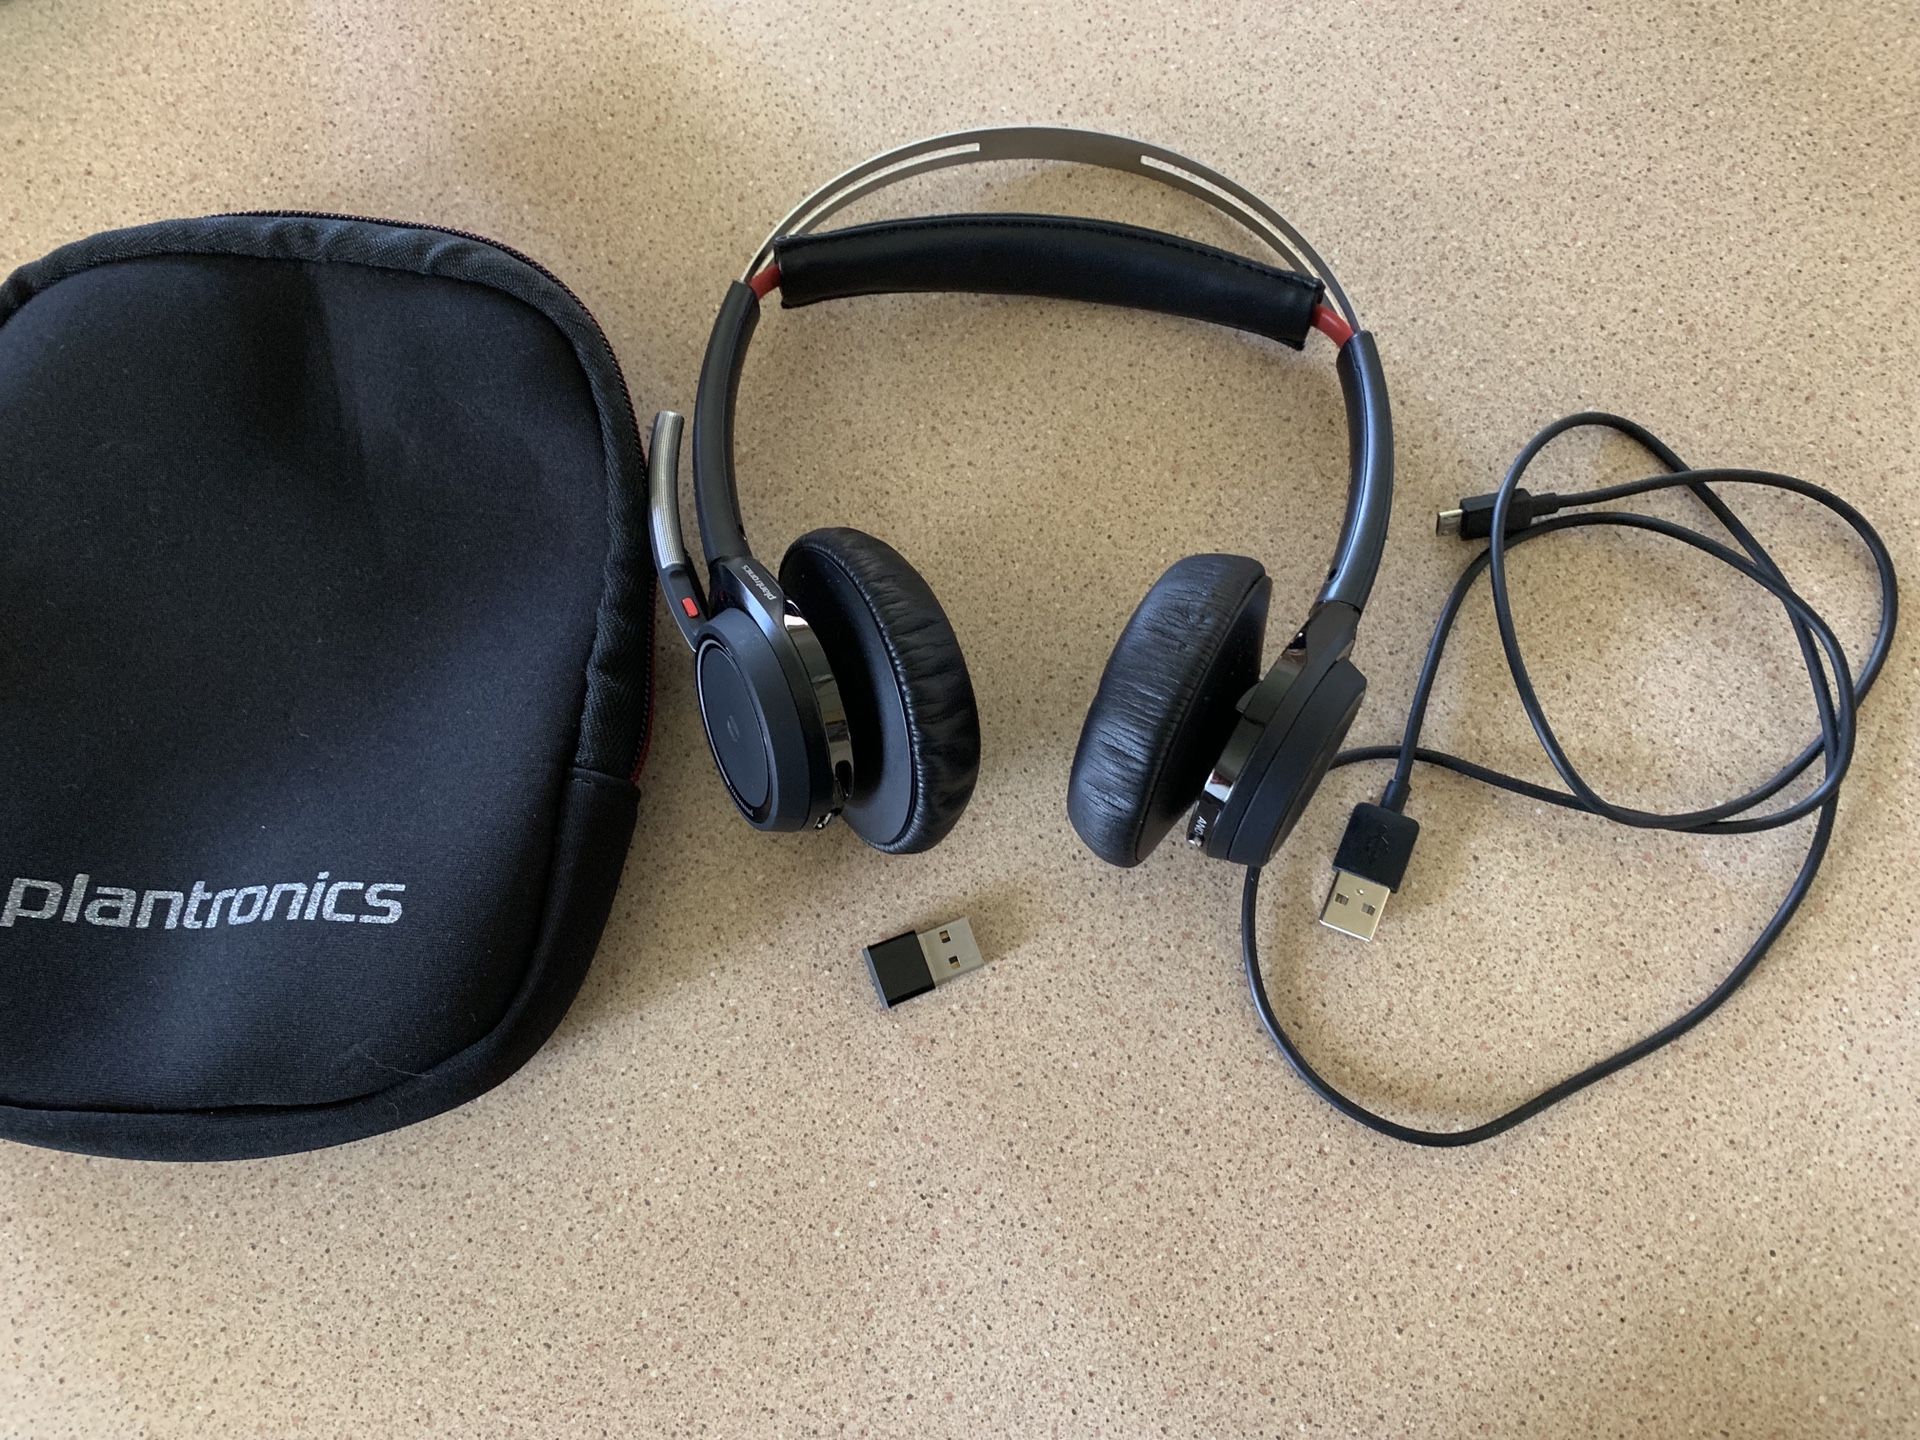 Plantronics Voyager Focus UC Bluetooth USB B825 202652-01 Headset with Active Noise Cancelling